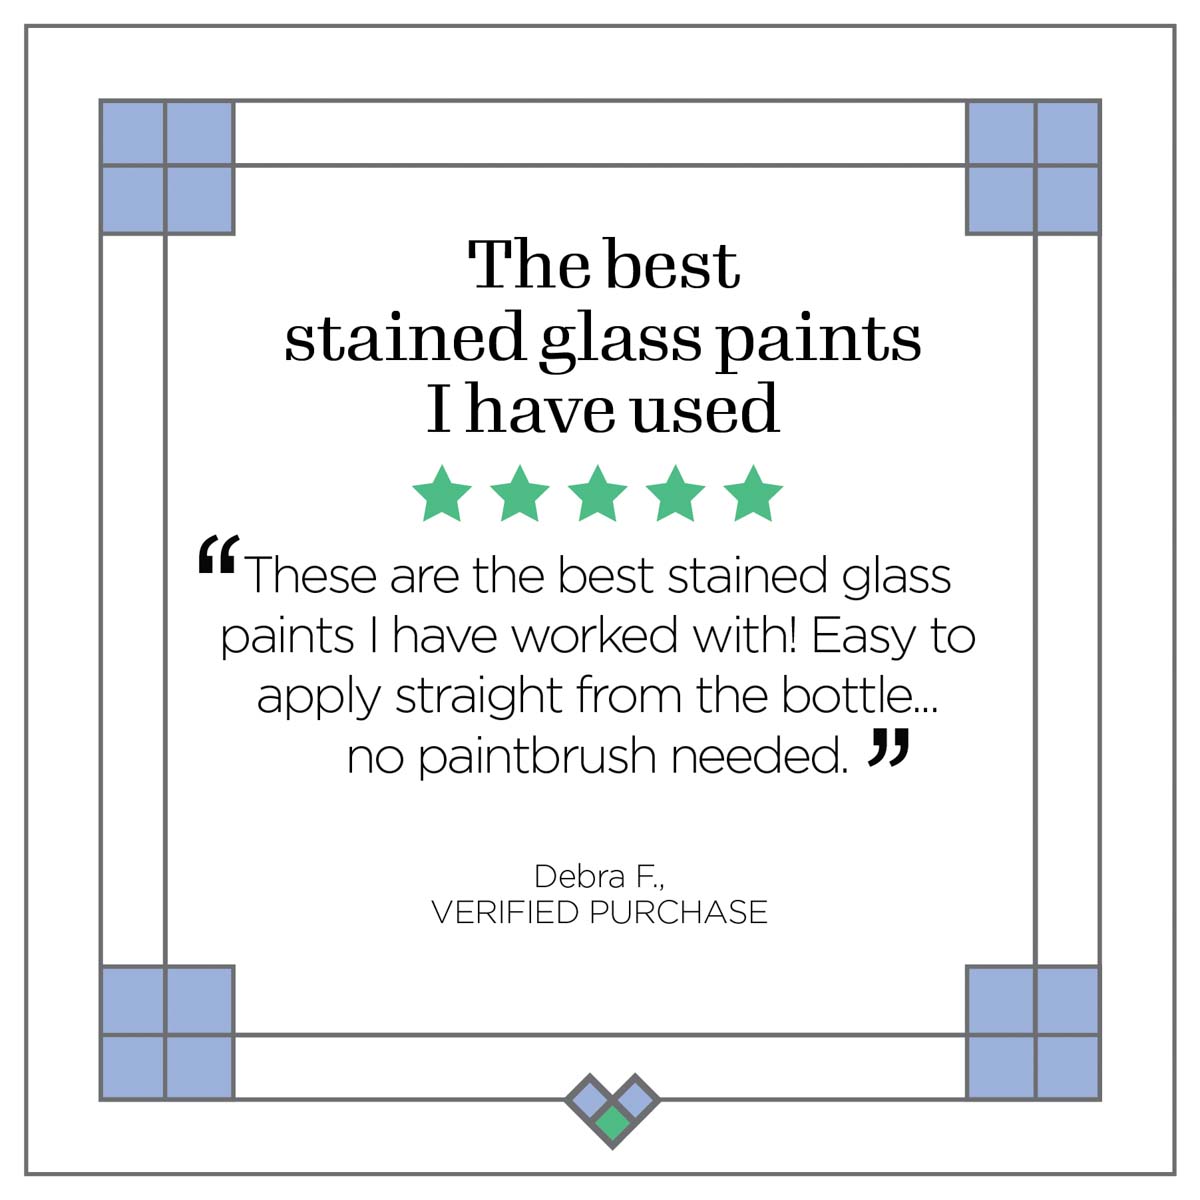 Gallery Glass ® Stained Glass Effect Paint - Sunflower, 2 oz. - 20032